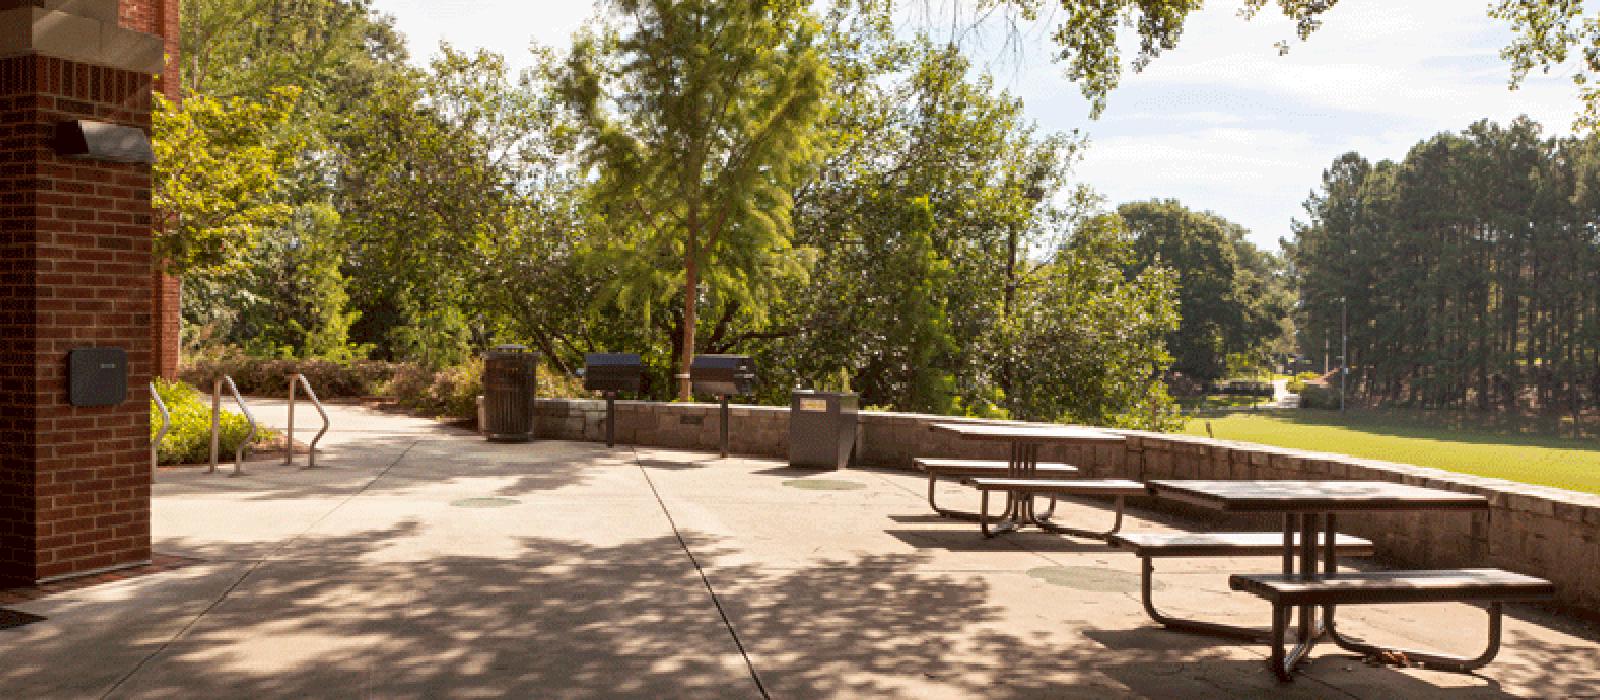 Patio area with barbeque grills, picnic tables and chairs.